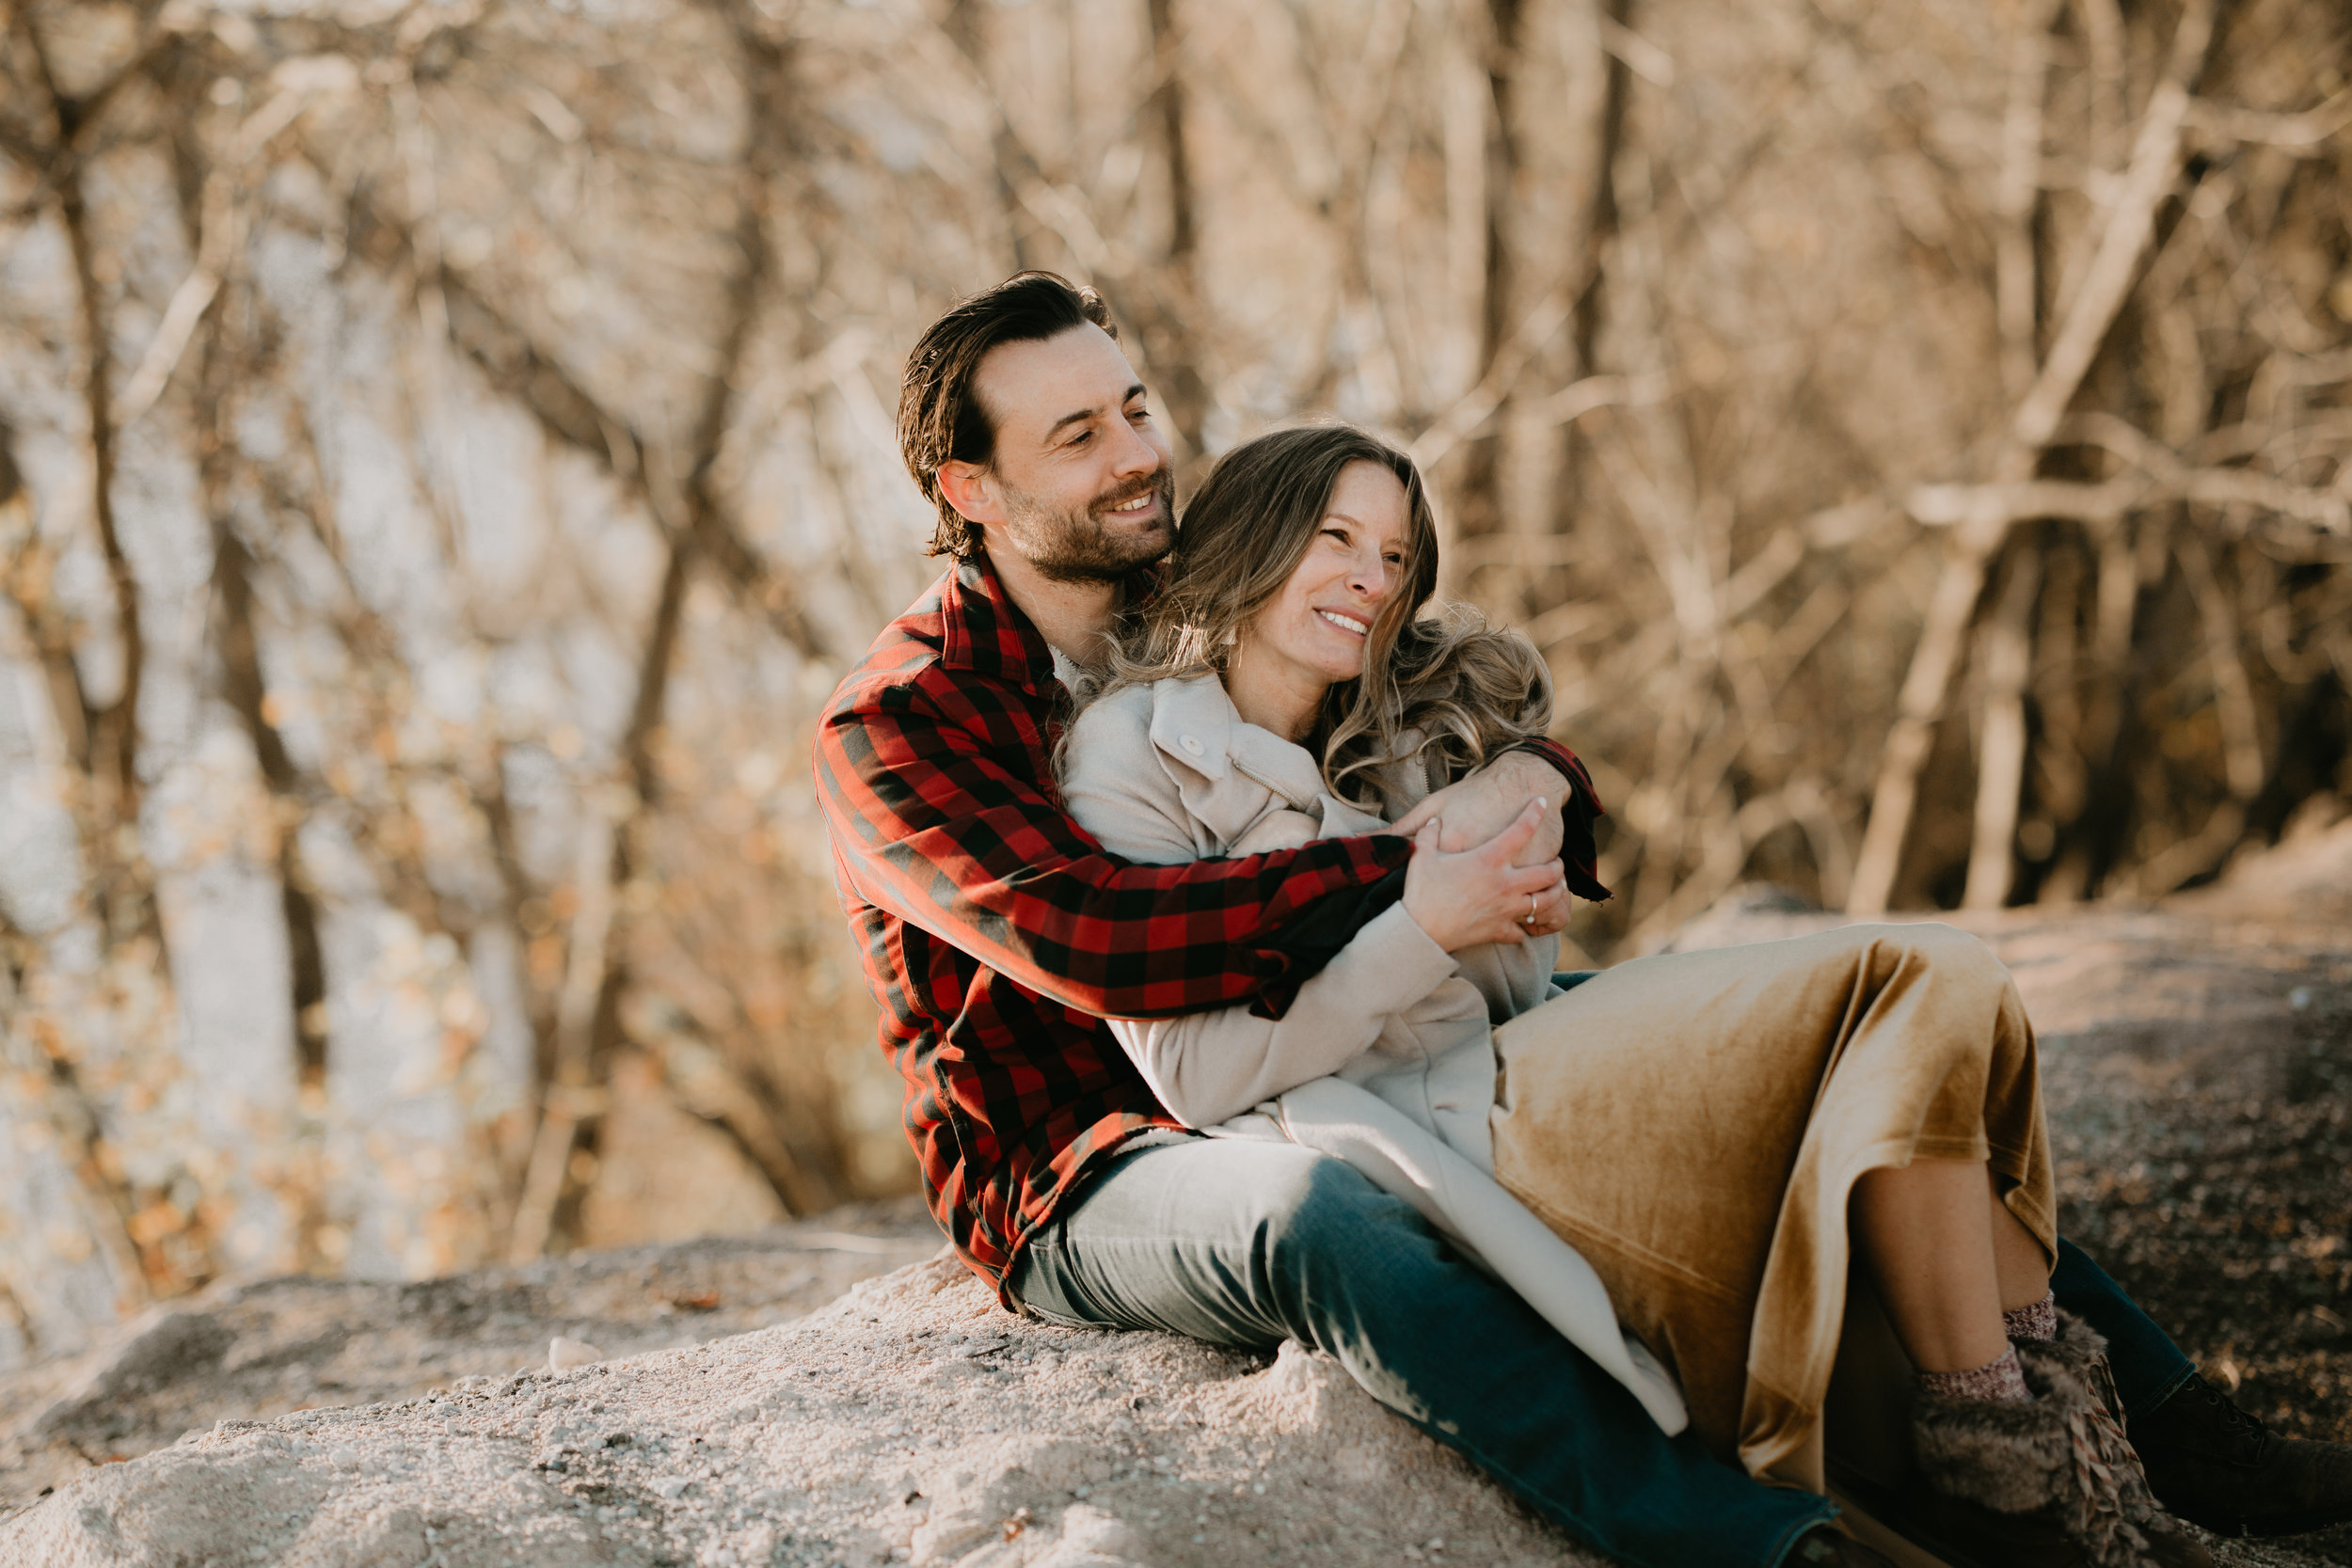 nicole-daacke-photography-white-cliffs-of-conoy-in-lancaster-pa-pennsylvania-adventure-session-adventure-elopement-photographer-engagement session-in-lancaster-pa-photographer-golden-sunset-winter-solstice-wedding-riverside-elopement-4907.jpg